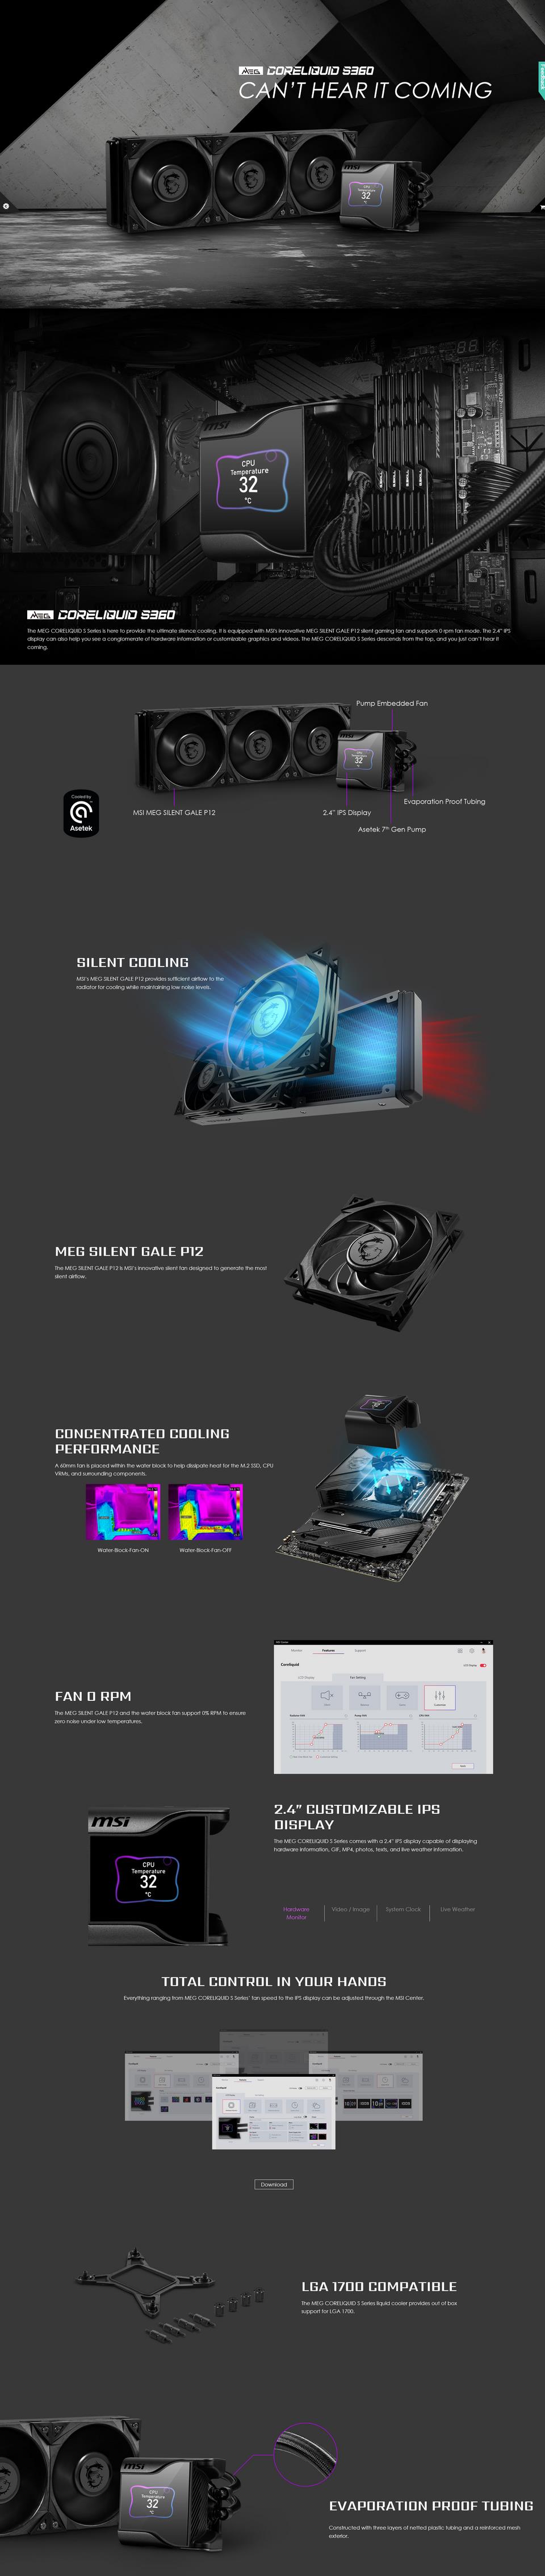 A large marketing image providing additional information about the product MSI MEG CORELIQUID S360 360mm AIO CPU Cooler - Additional alt info not provided